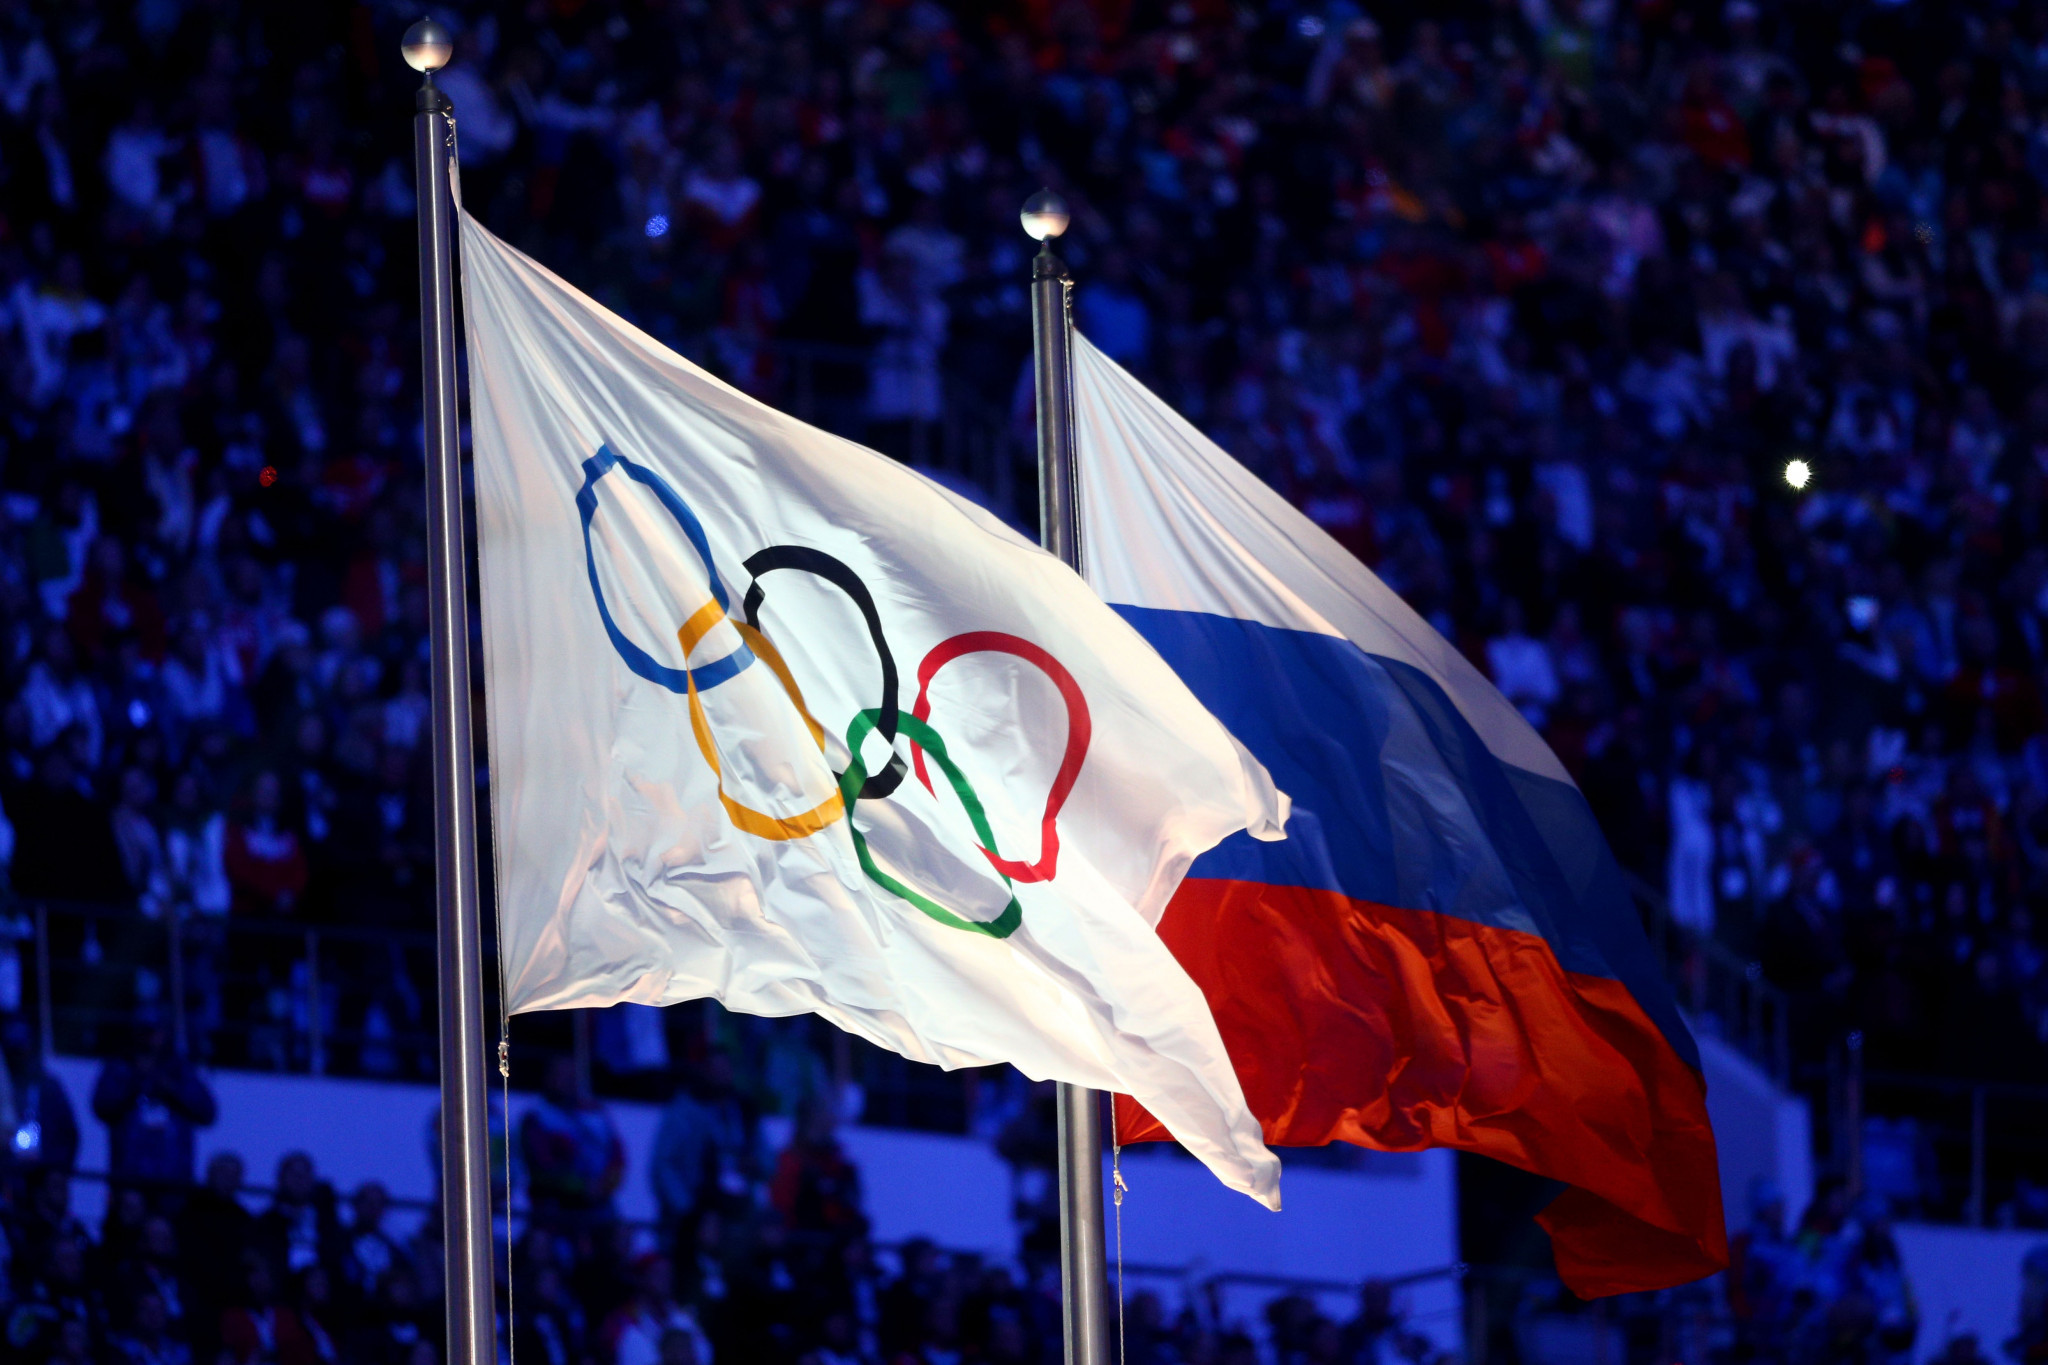 Thomas Bach said the IOC's relationship with the Russian Government had "rapidly deteriorated" ©Getty Images